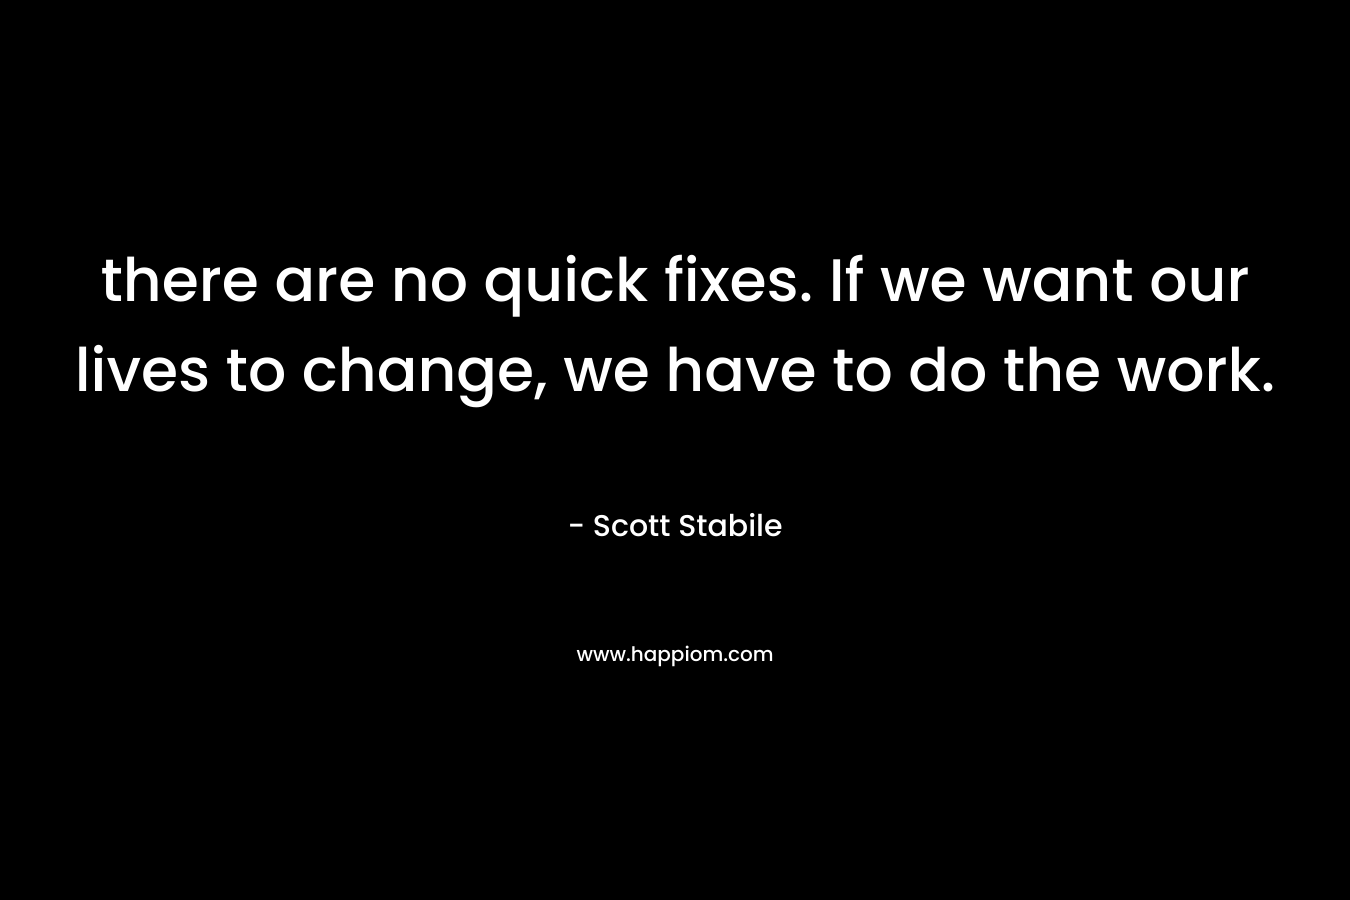 there are no quick fixes. If we want our lives to change, we have to do the work.